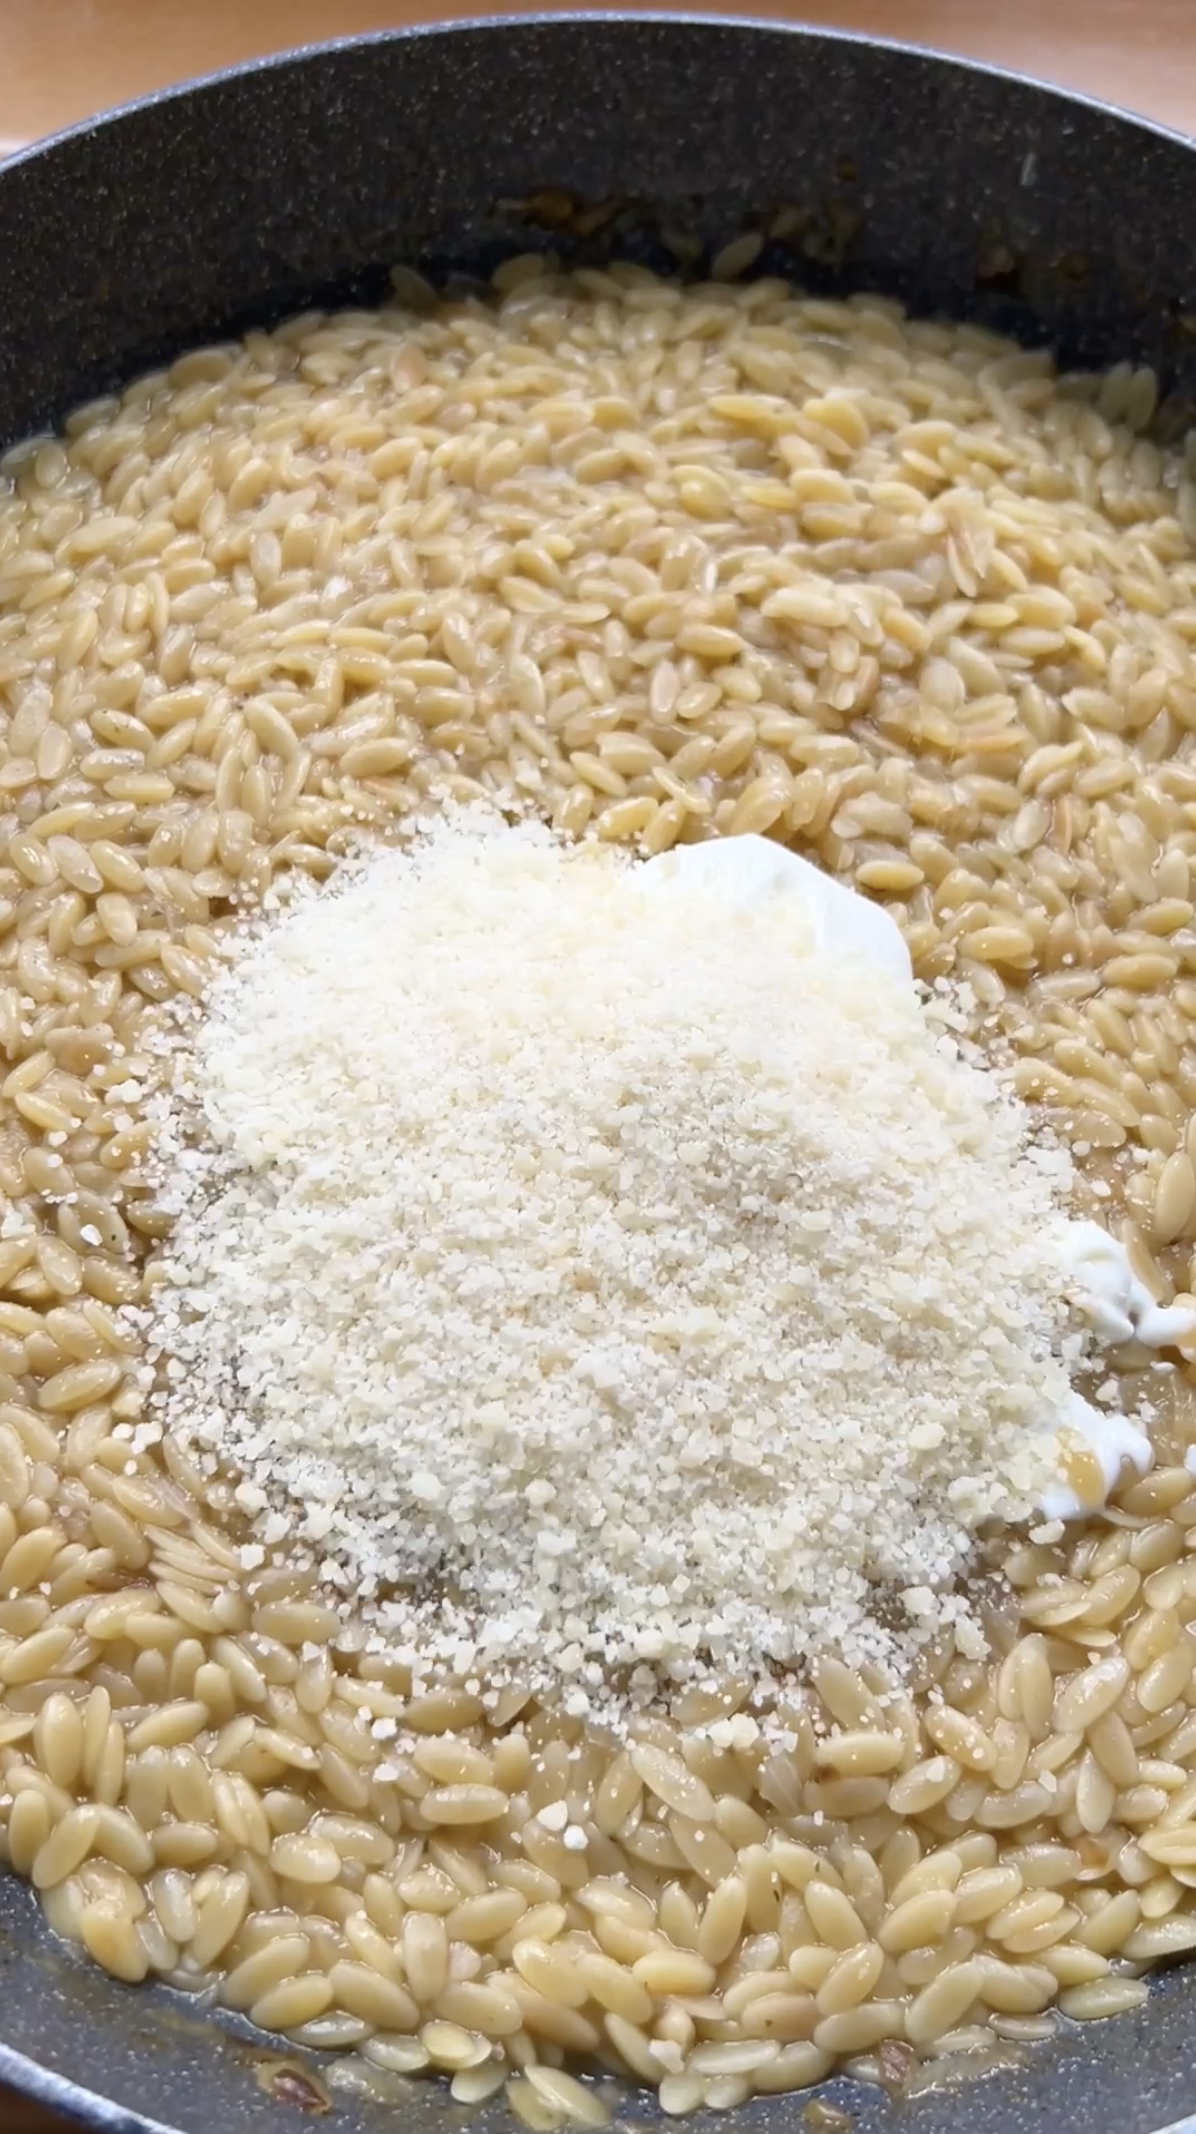 Parmesan and cream added to the pan of cooked pasta.